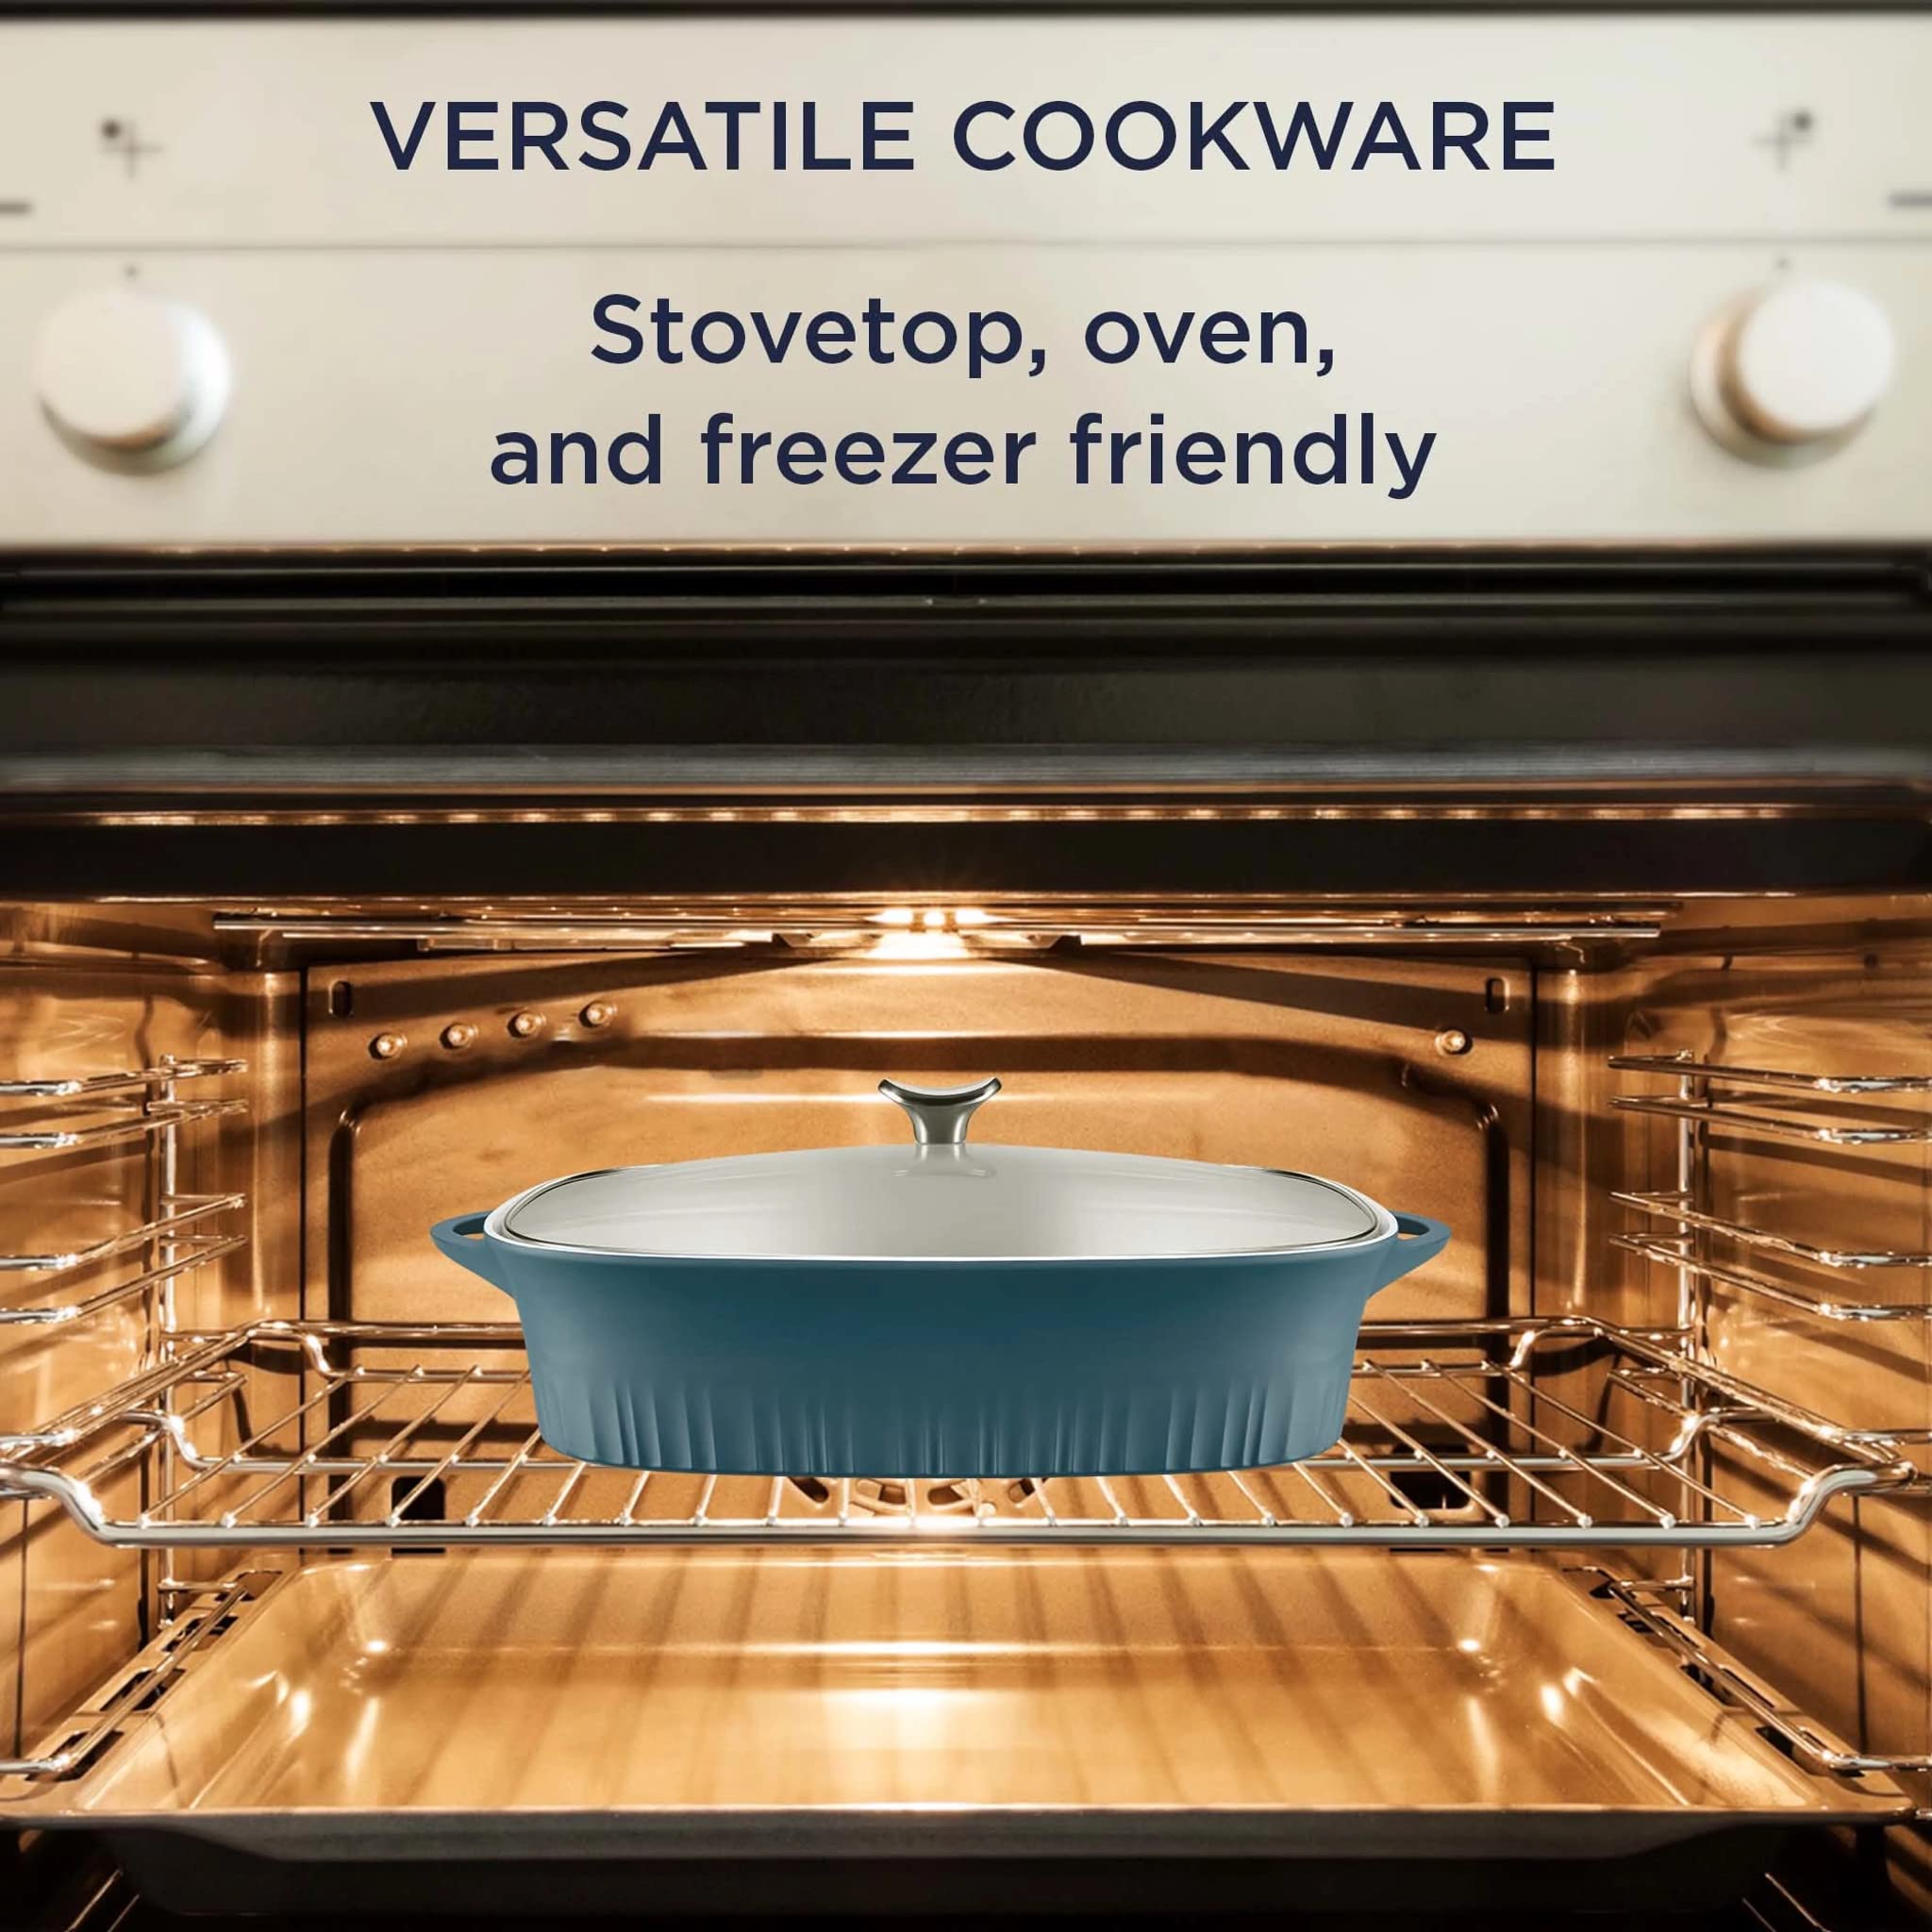 CorningWare, Non-Stick 5.7 Quart QuickHeat Roaster with Lid, Lightweight Roaster, Ceramic Non-Stick Interior Coating for Even Heat Cooking, French Navy